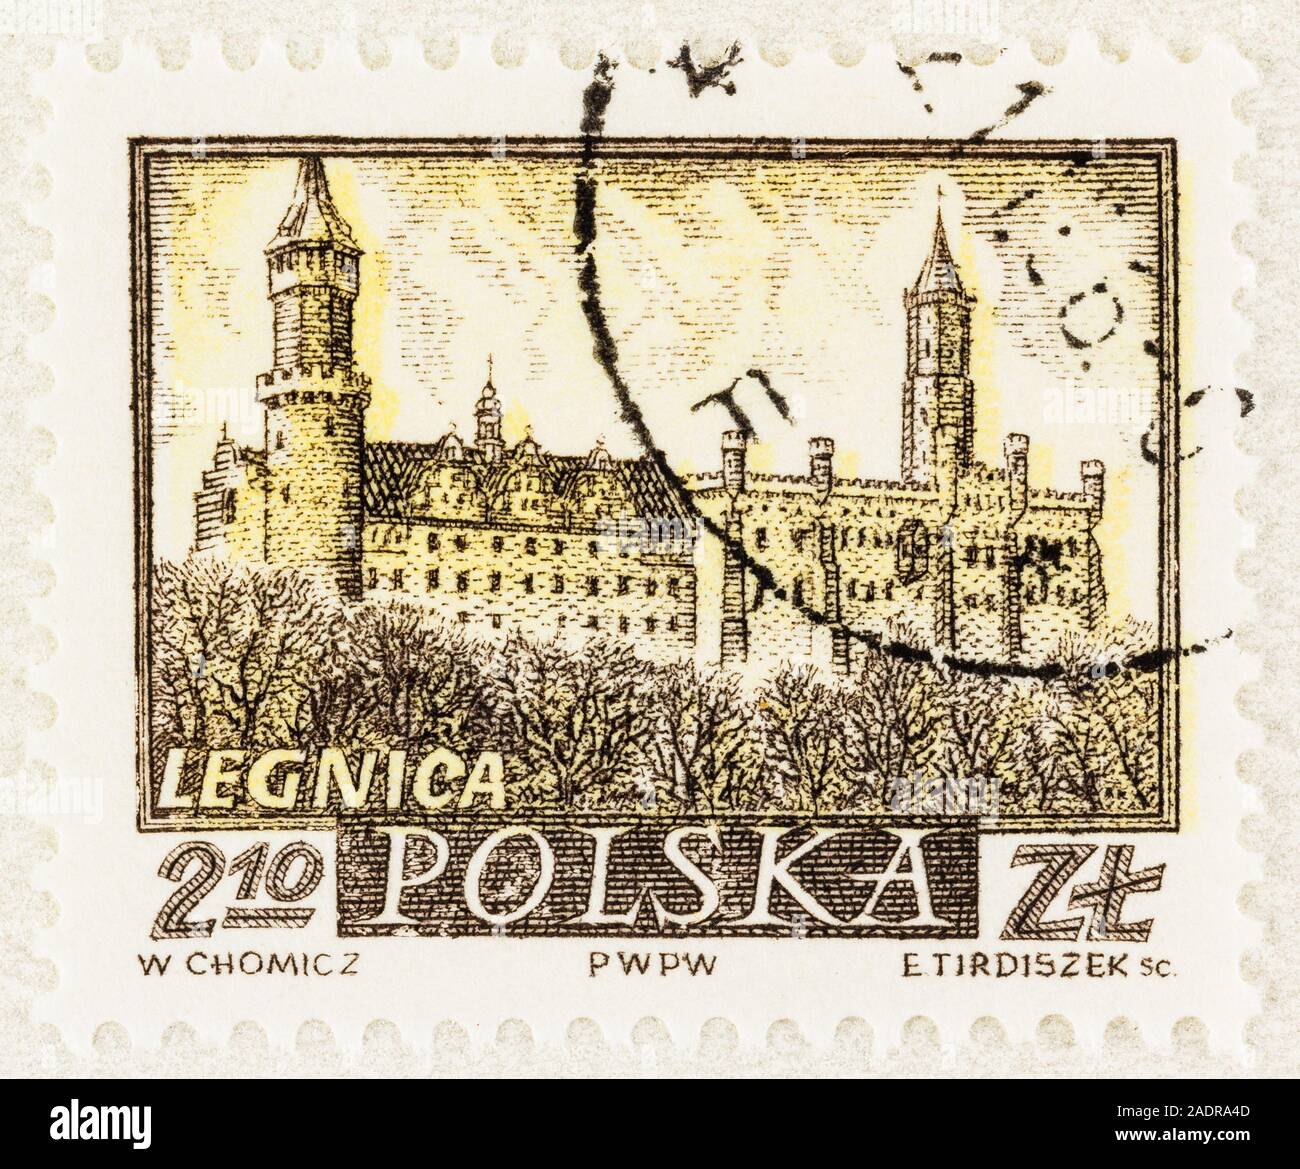 SEATTLE WASHINGTON - October 9, 2019: Stamp of Legnica  Poland featuring Piast Castle in yellow and black. Scott # 962. Stock Photo